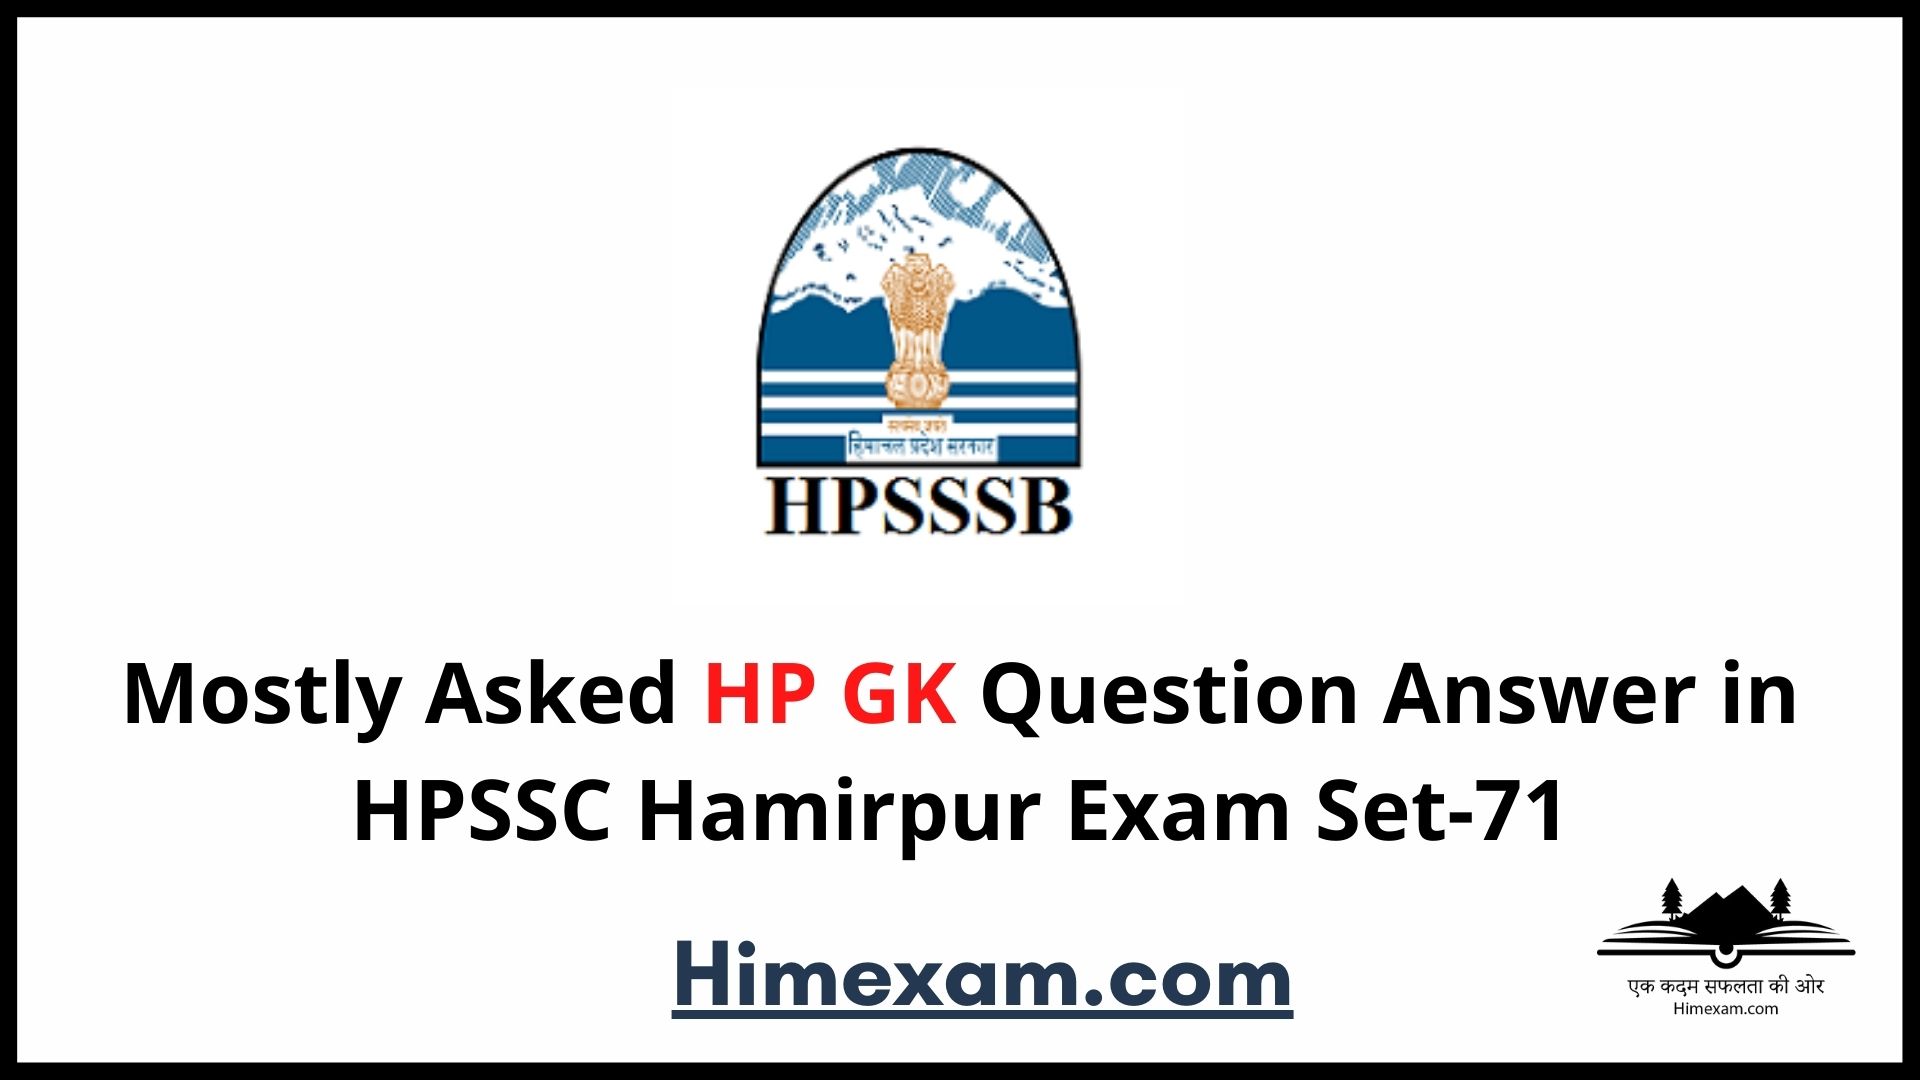 Mostly Asked HP GK Question Answer in HPSSC Hamirpur Exam Set-71